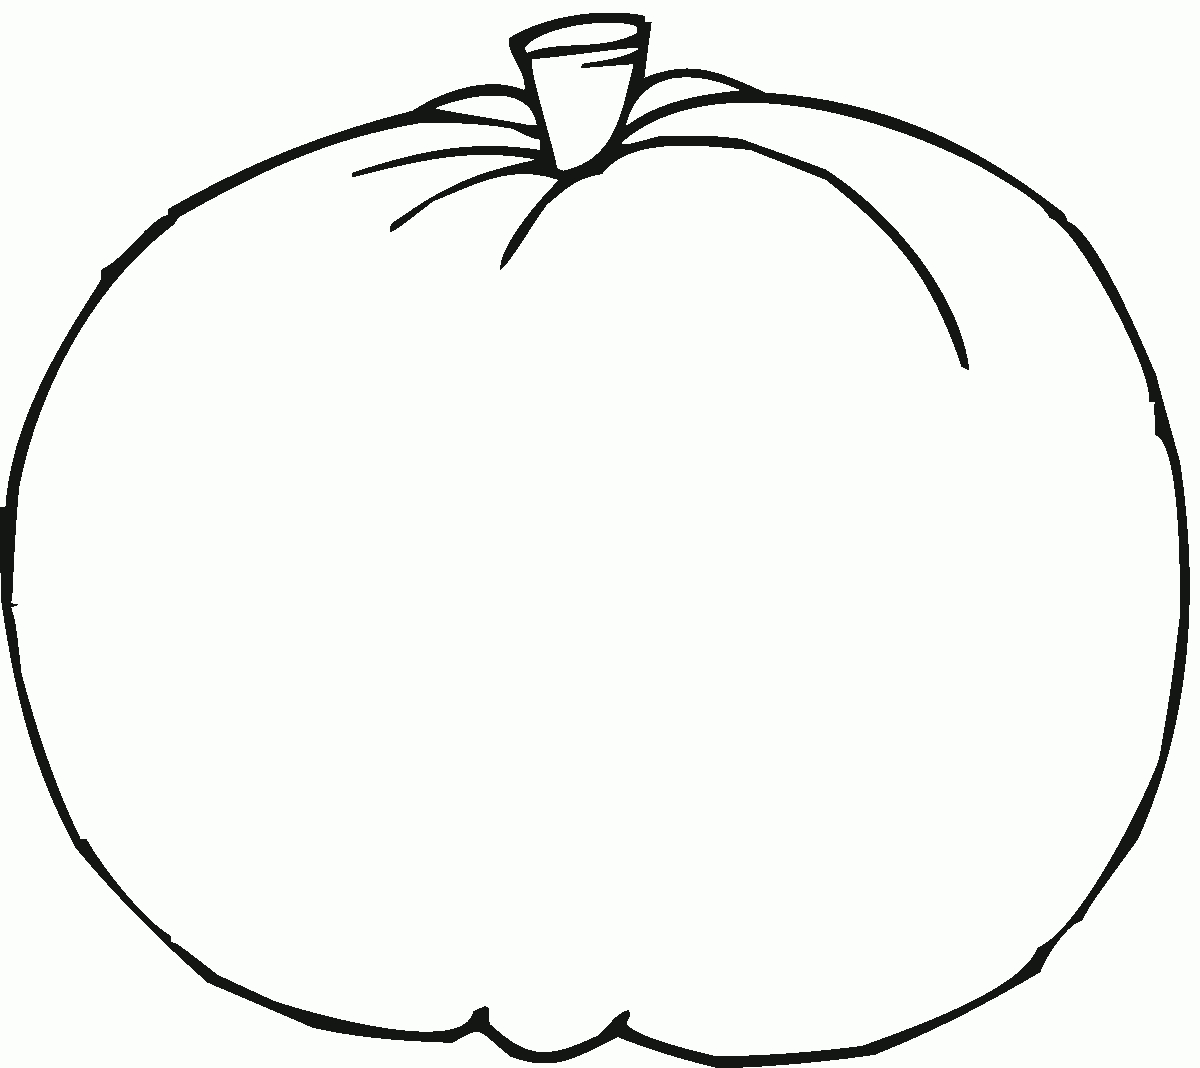 Pumpkin Outline For Lego Painting | Preschool Time | Pinterest - Free Printable Pumpkin Coloring Pages